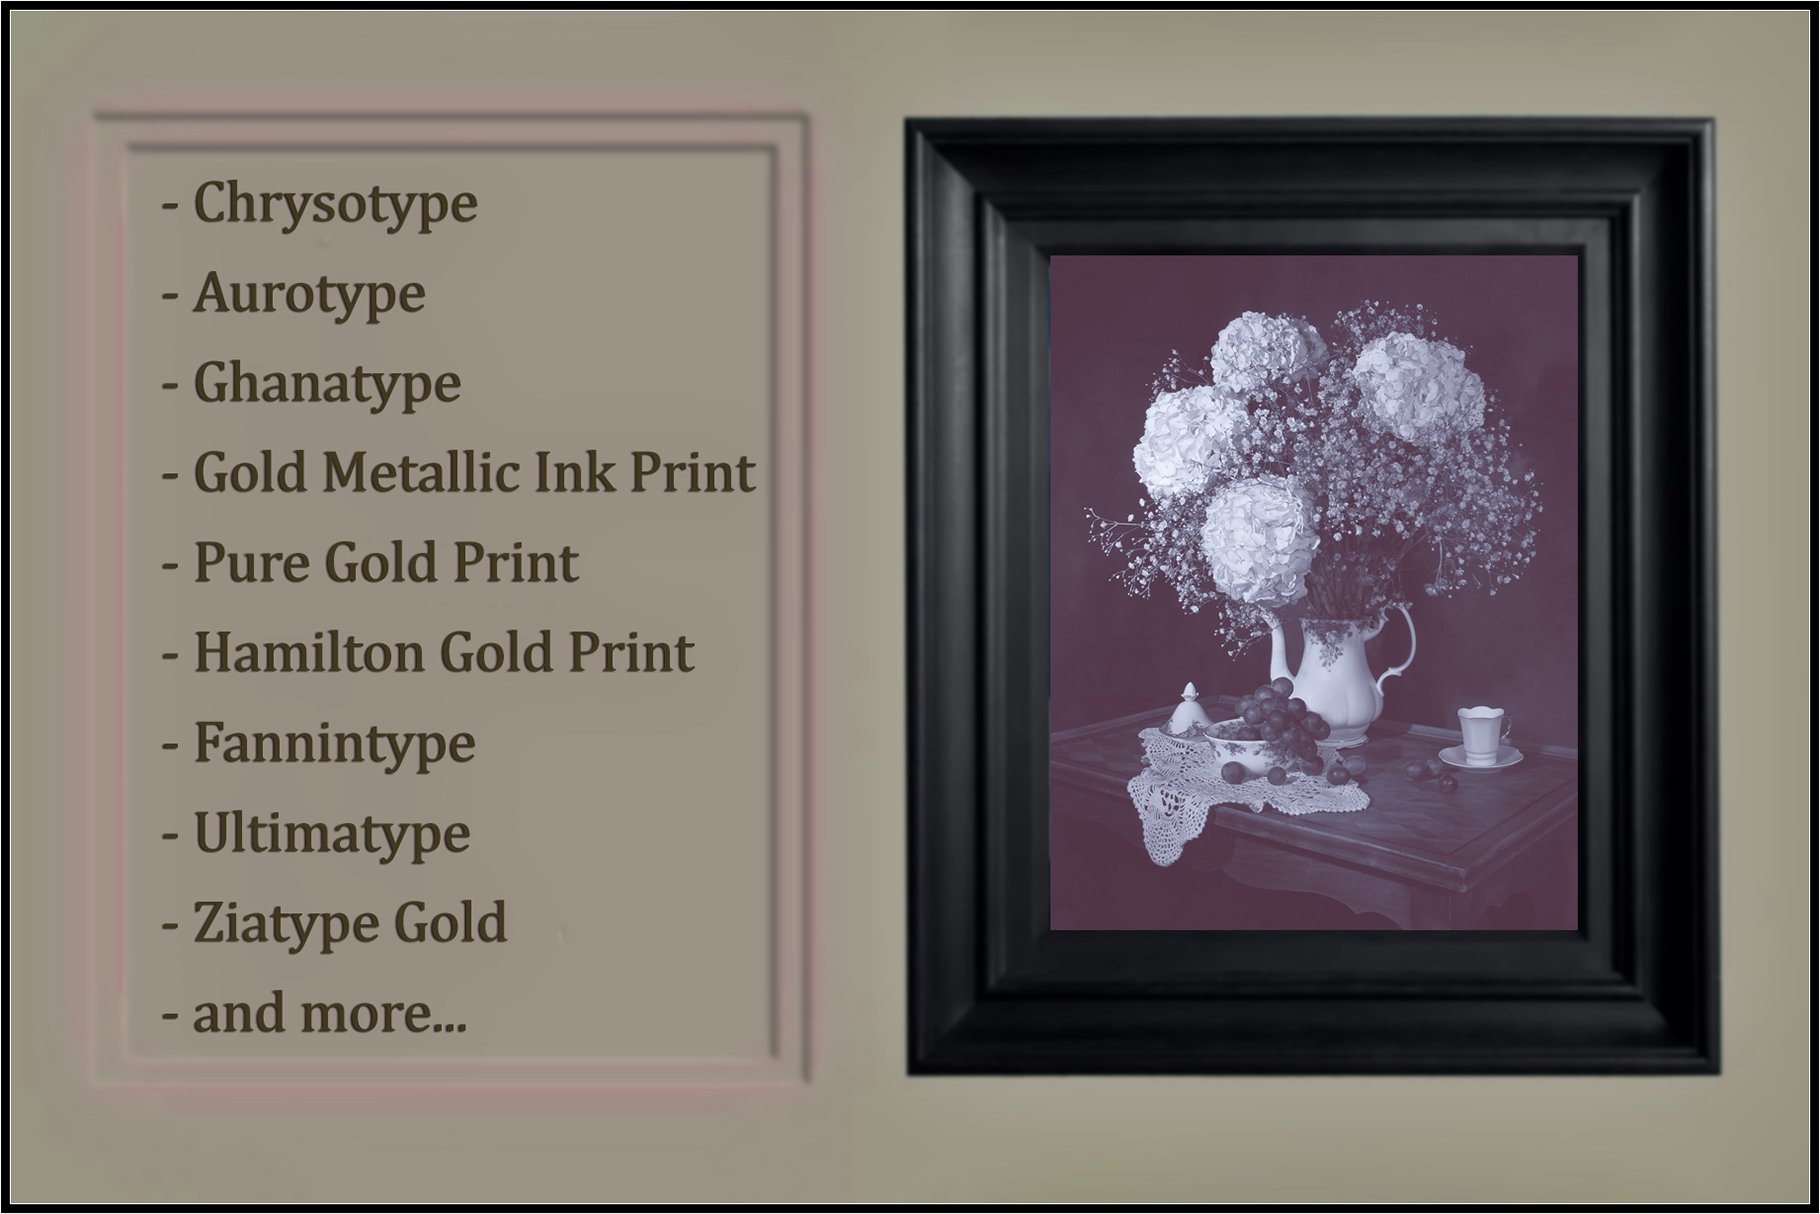 Genuine Gold Photographic Print LUTspreview image.